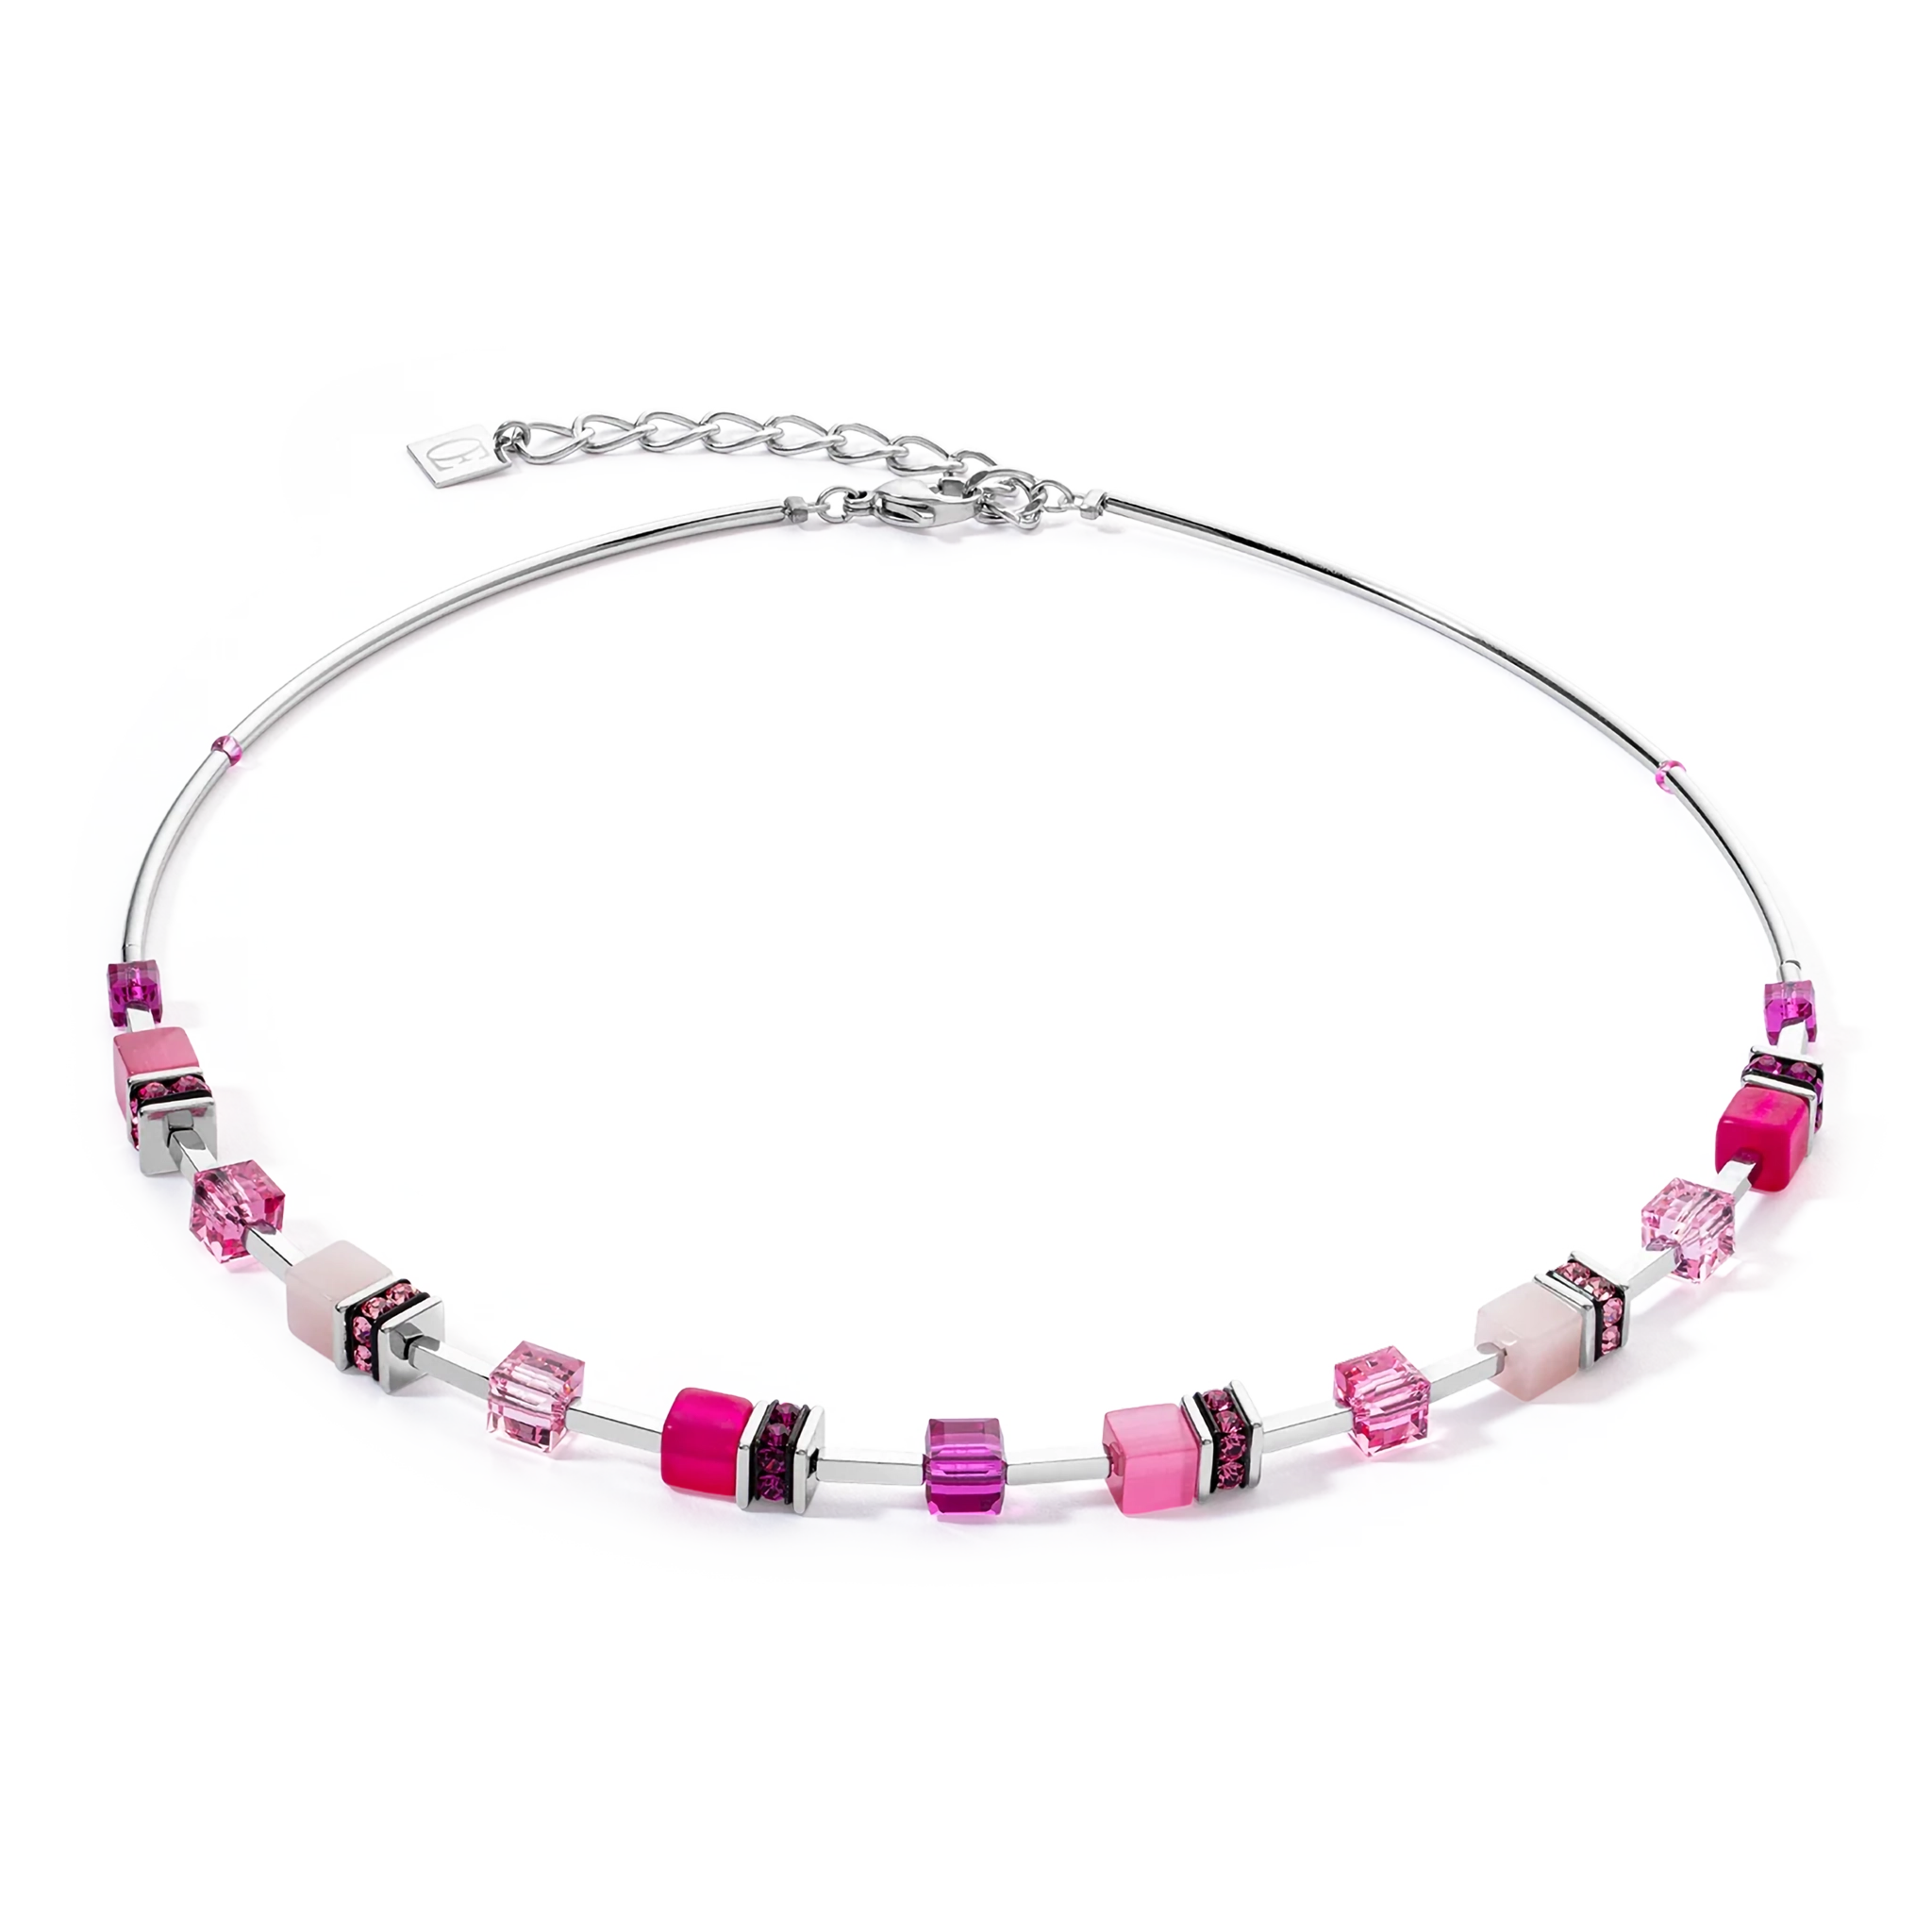 A bright pink beaded stainless steel necklace